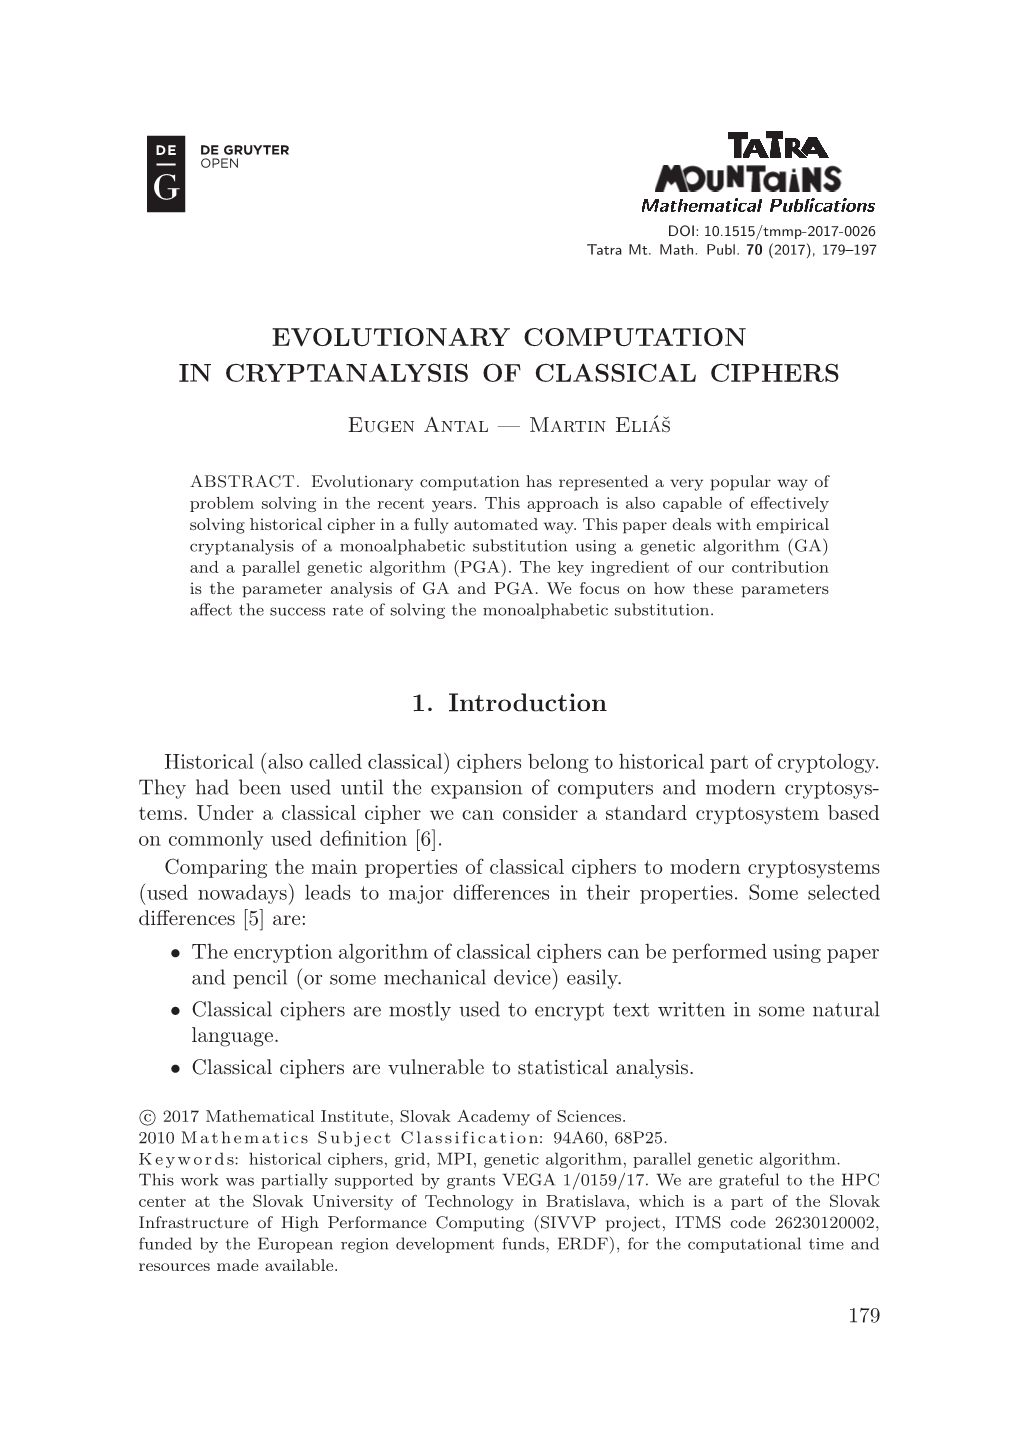 EVOLUTIONARY COMPUTATION in CRYPTANALYSIS of CLASSICAL CIPHERS 1. Introduction